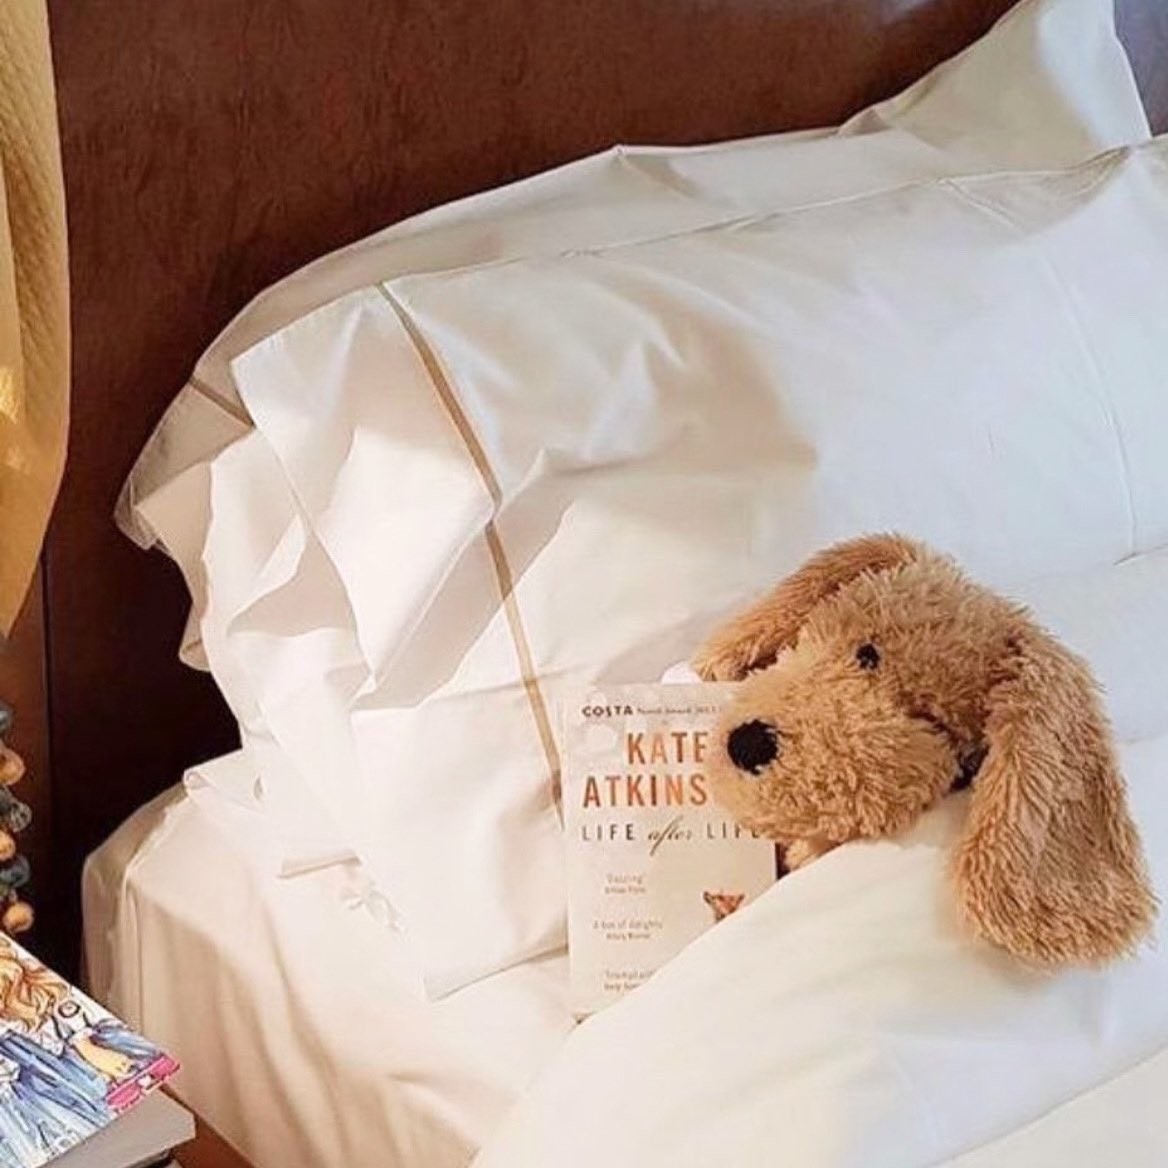 Heavenly Bed, always a great idea.
 
#sleepwell #westinrome #romanholiday